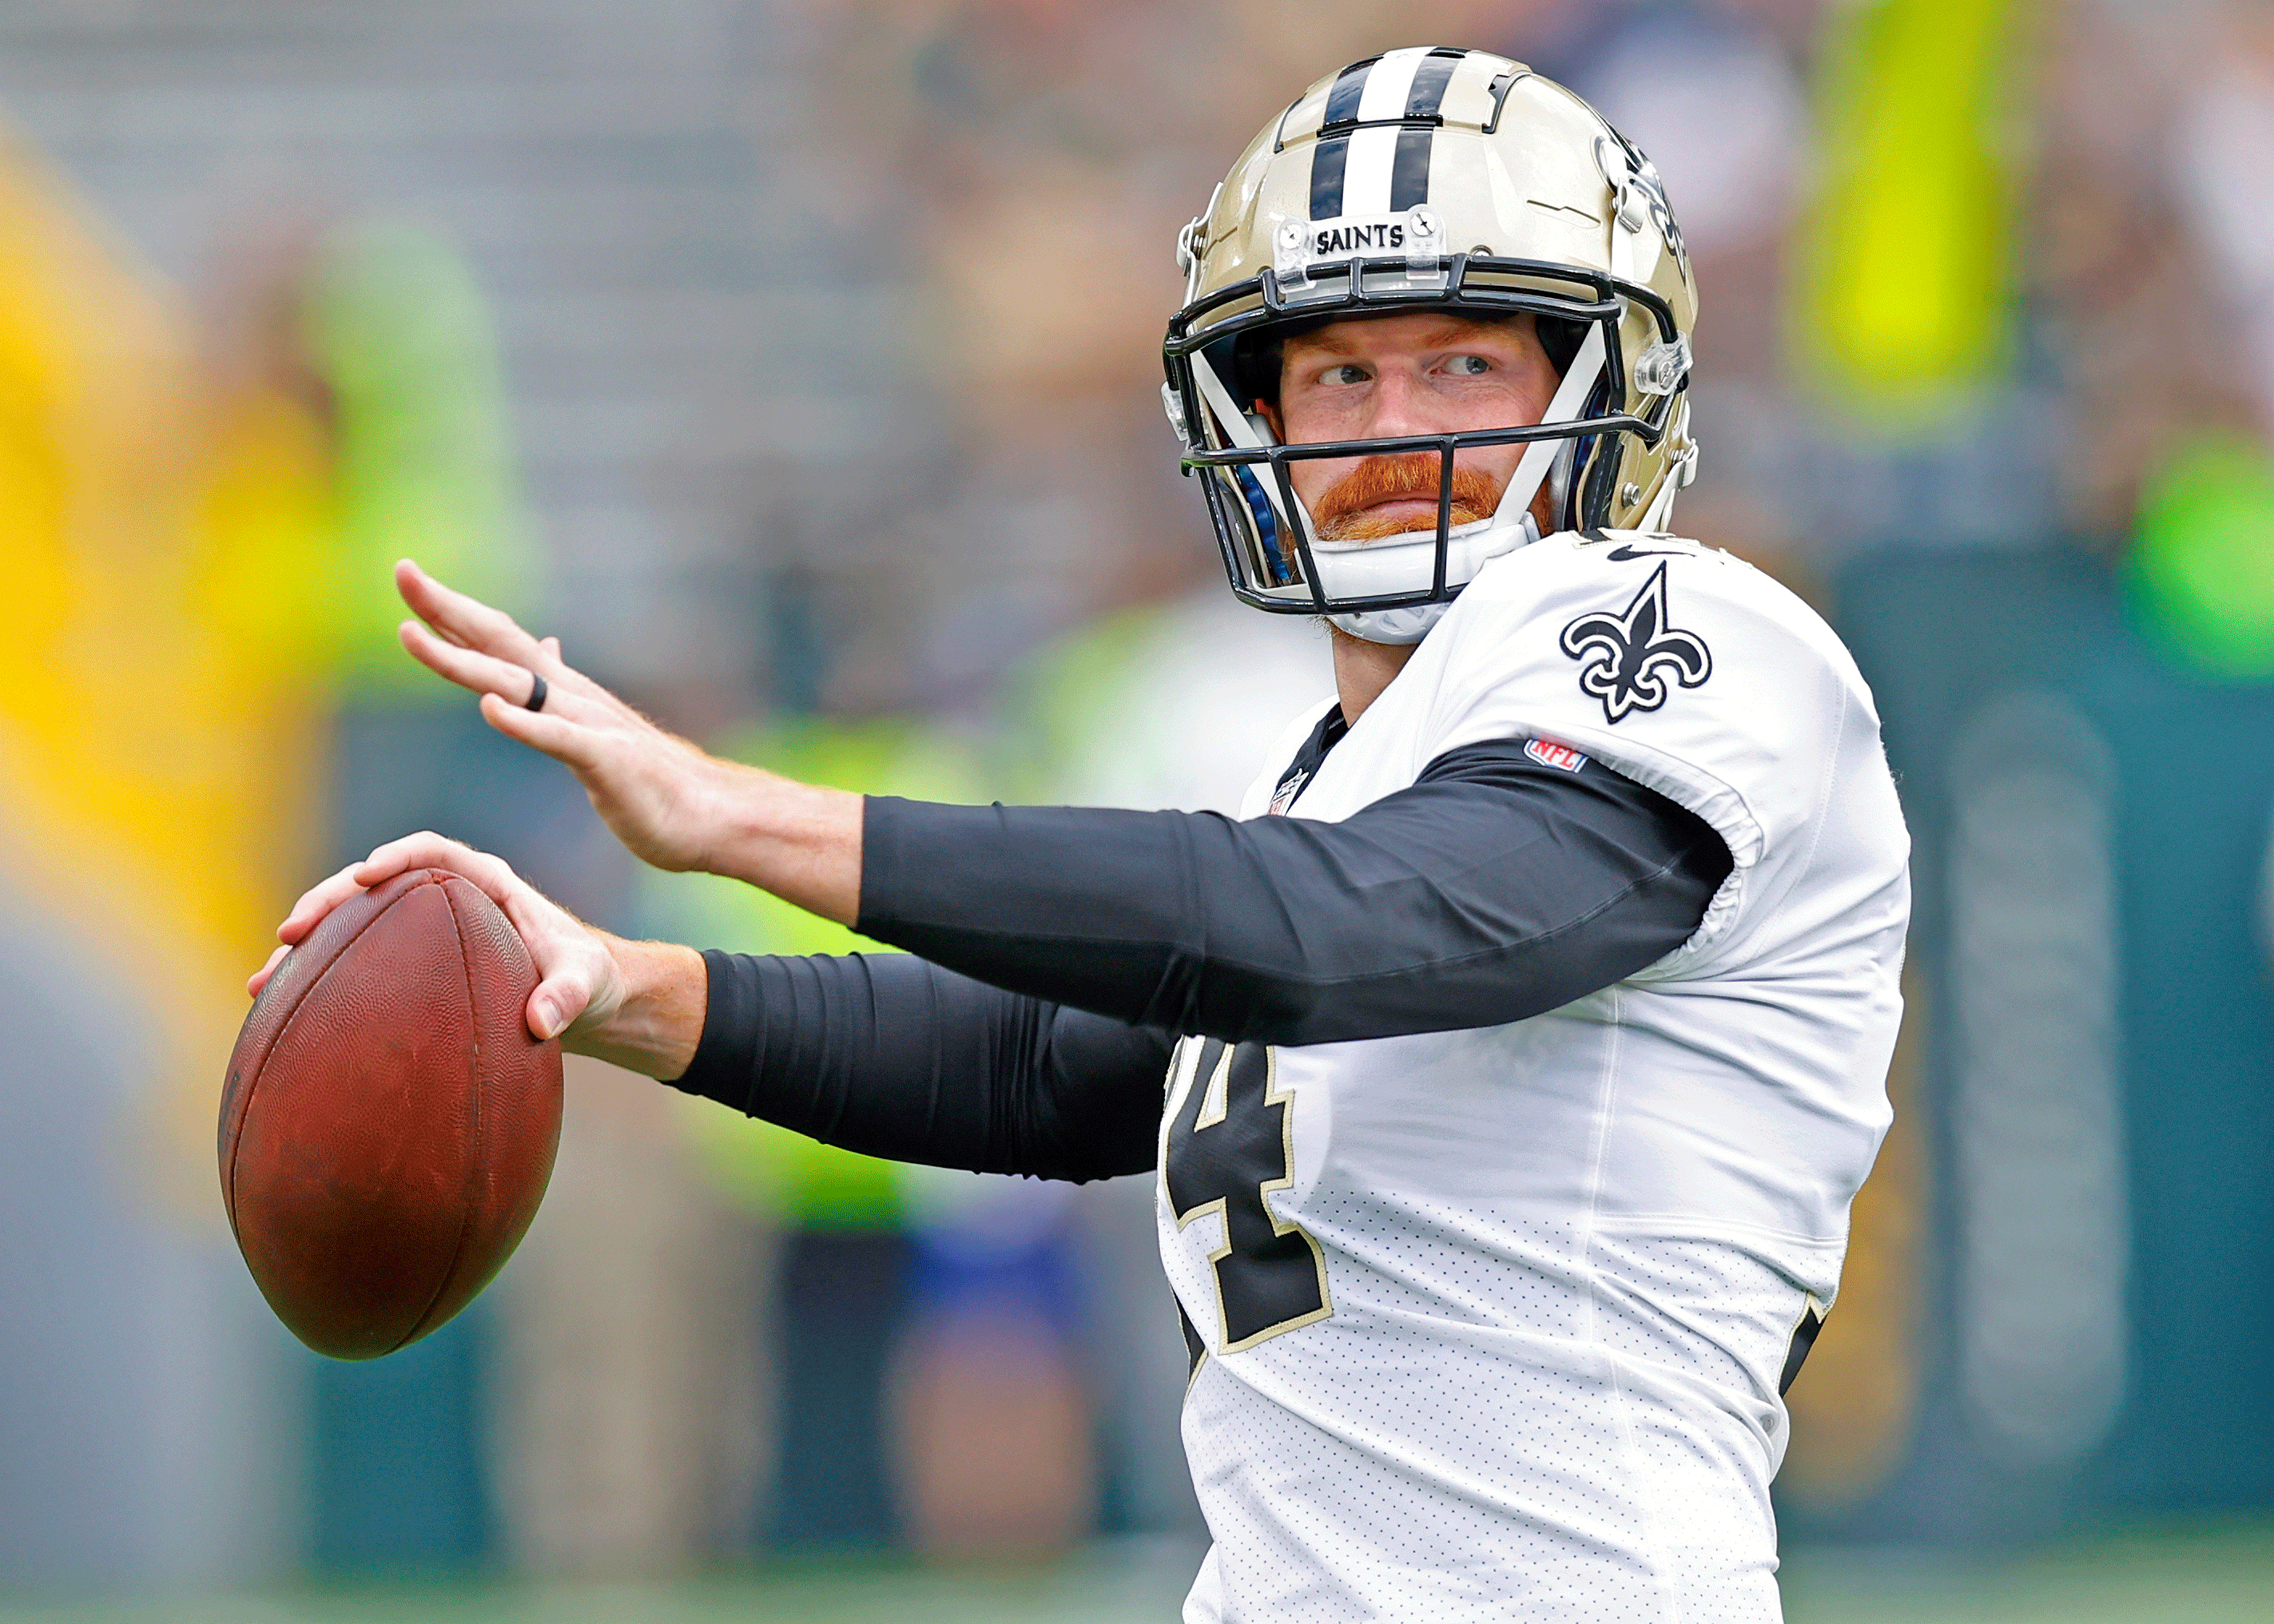 NFL Week 4 Odds and Betting Lines: Winston Doubtful, Thomas Out for Saints in London